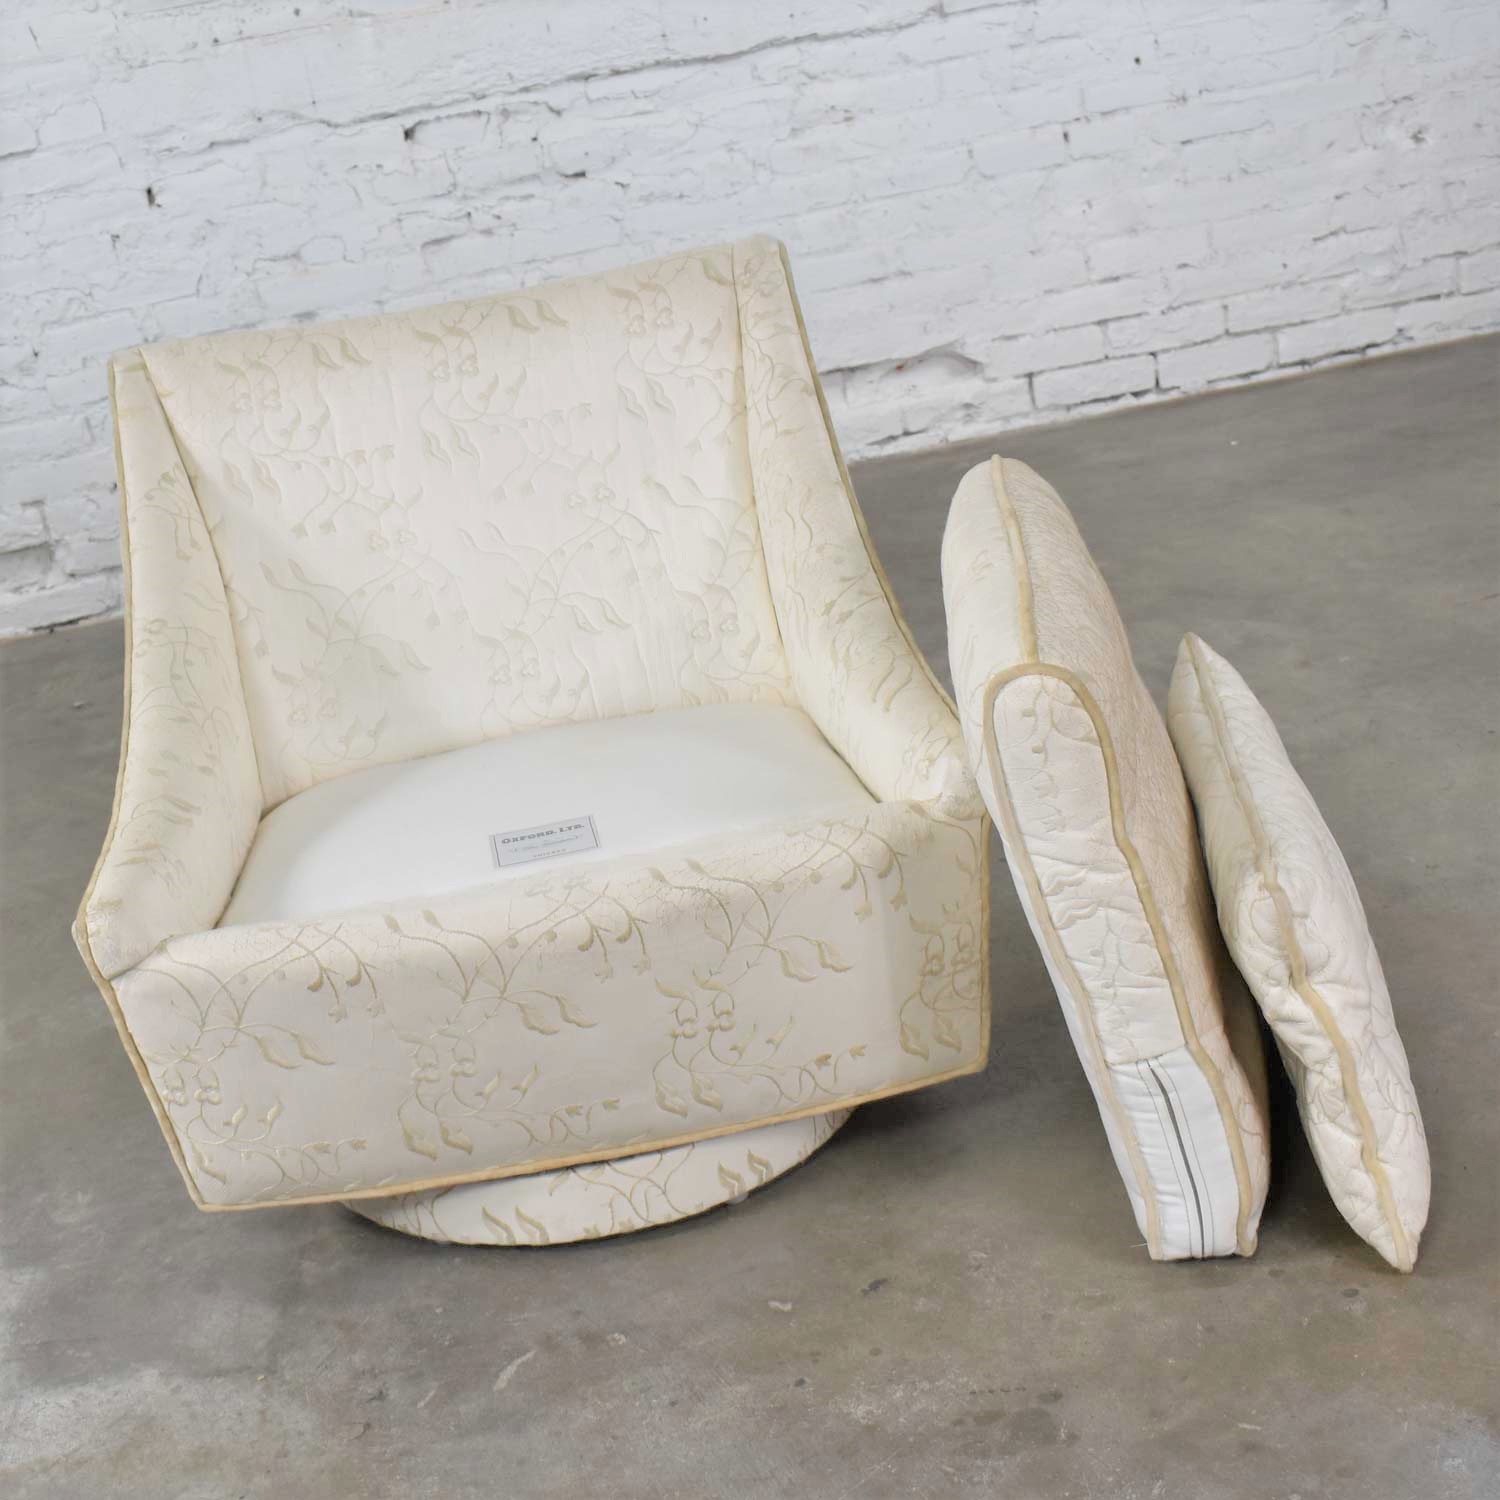 Vintage Art Deco Petite White Swivel Chair with Embroidered Leather by Oxford Ltd.